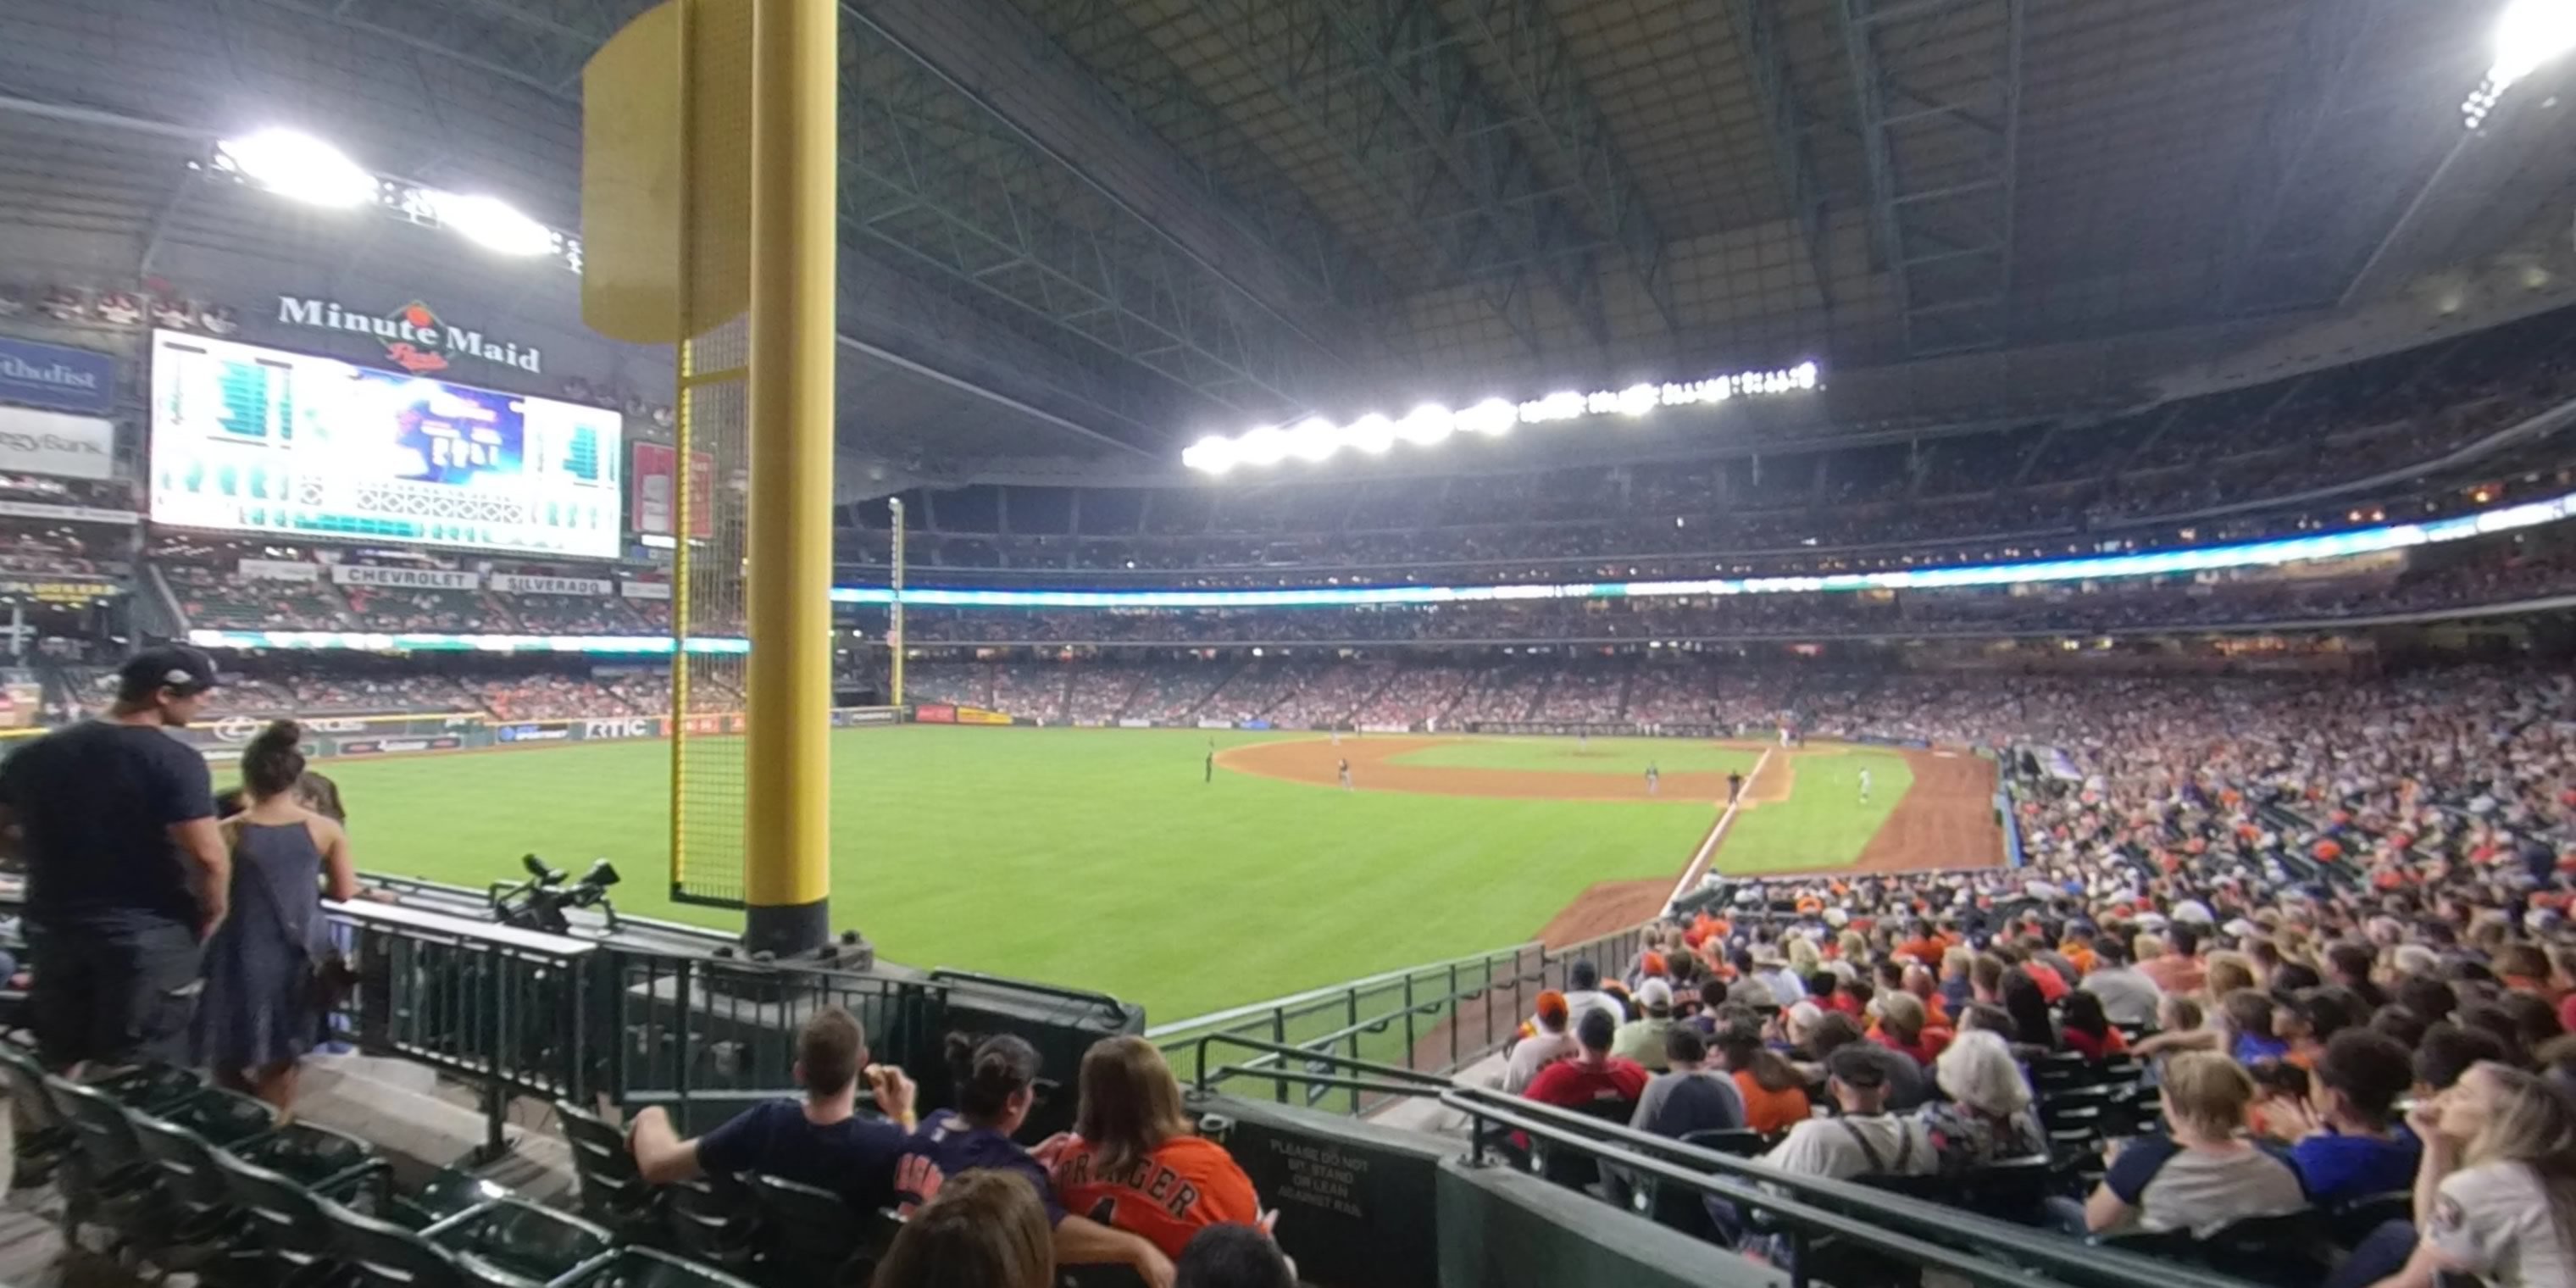 section 104 panoramic seat view  for baseball - minute maid park